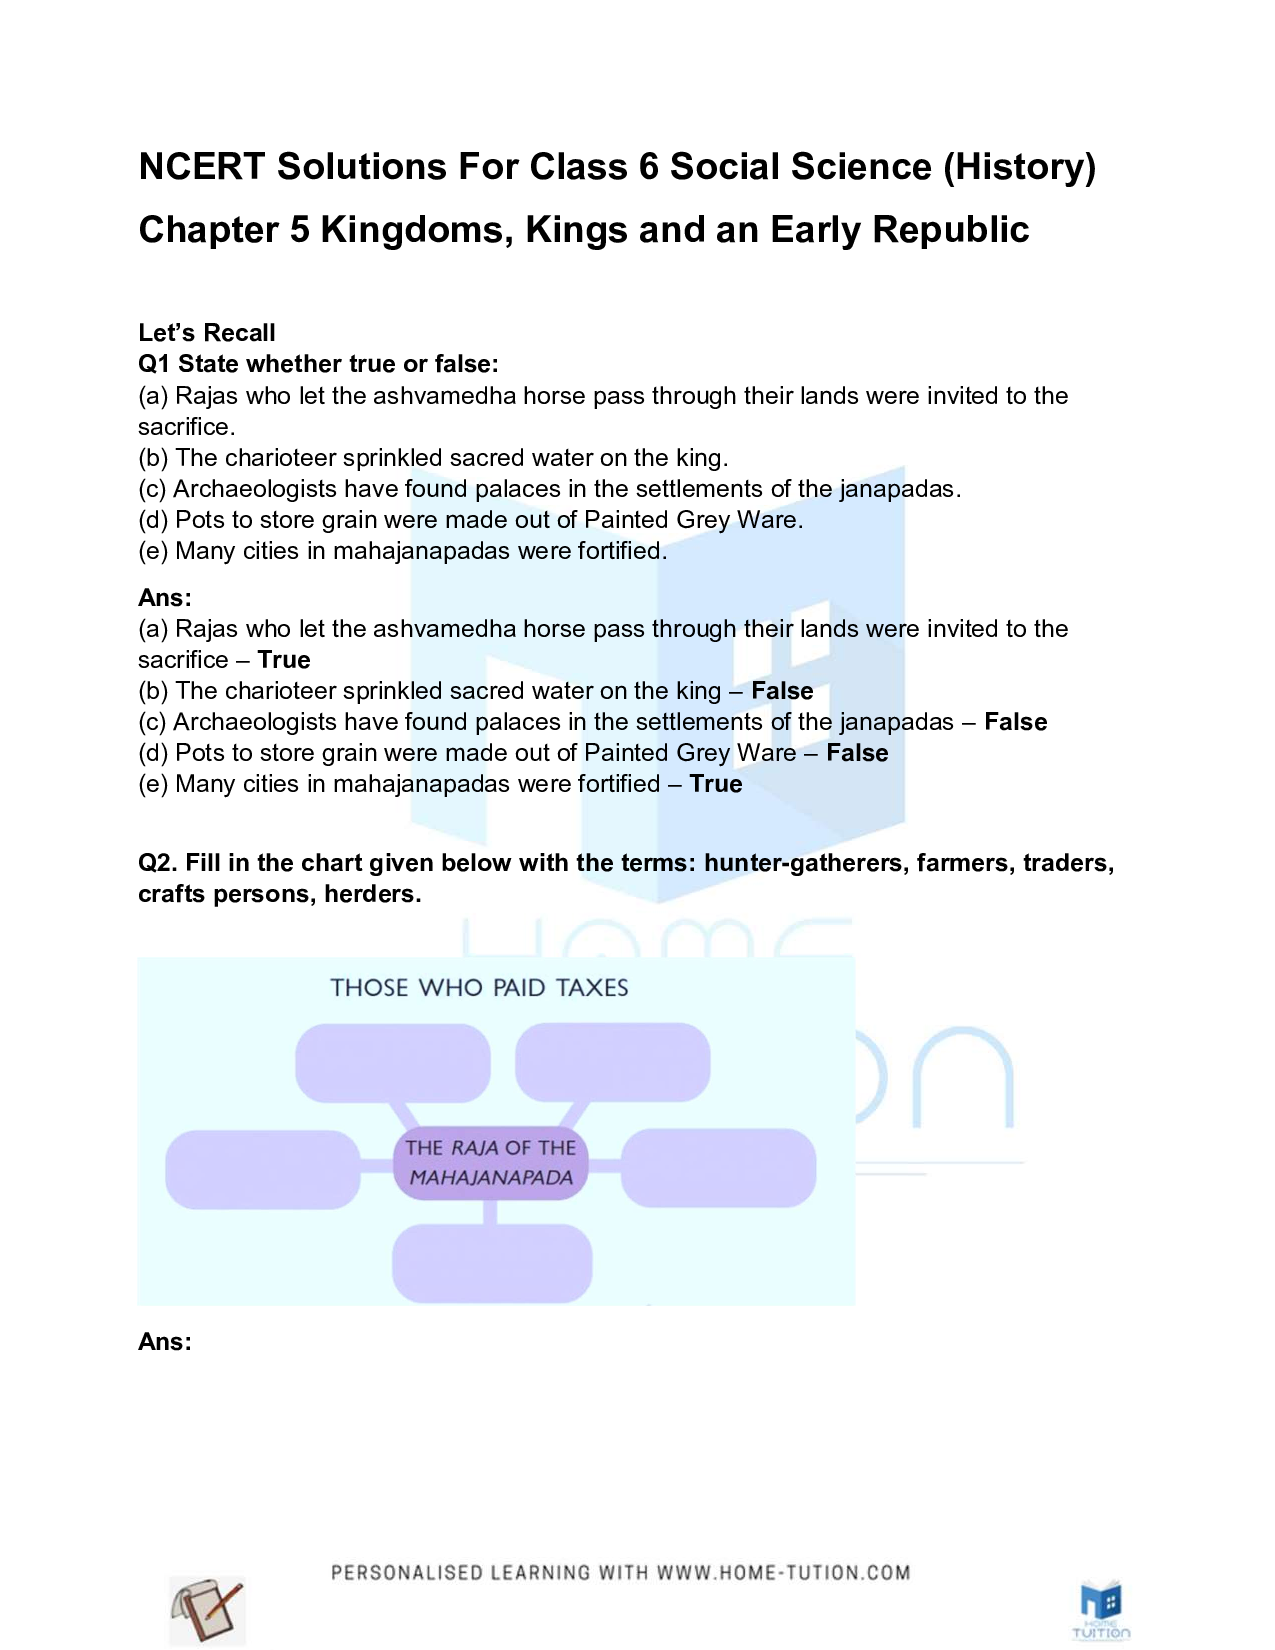 Chapter 5 Kingdoms, Kings and the Early Republic